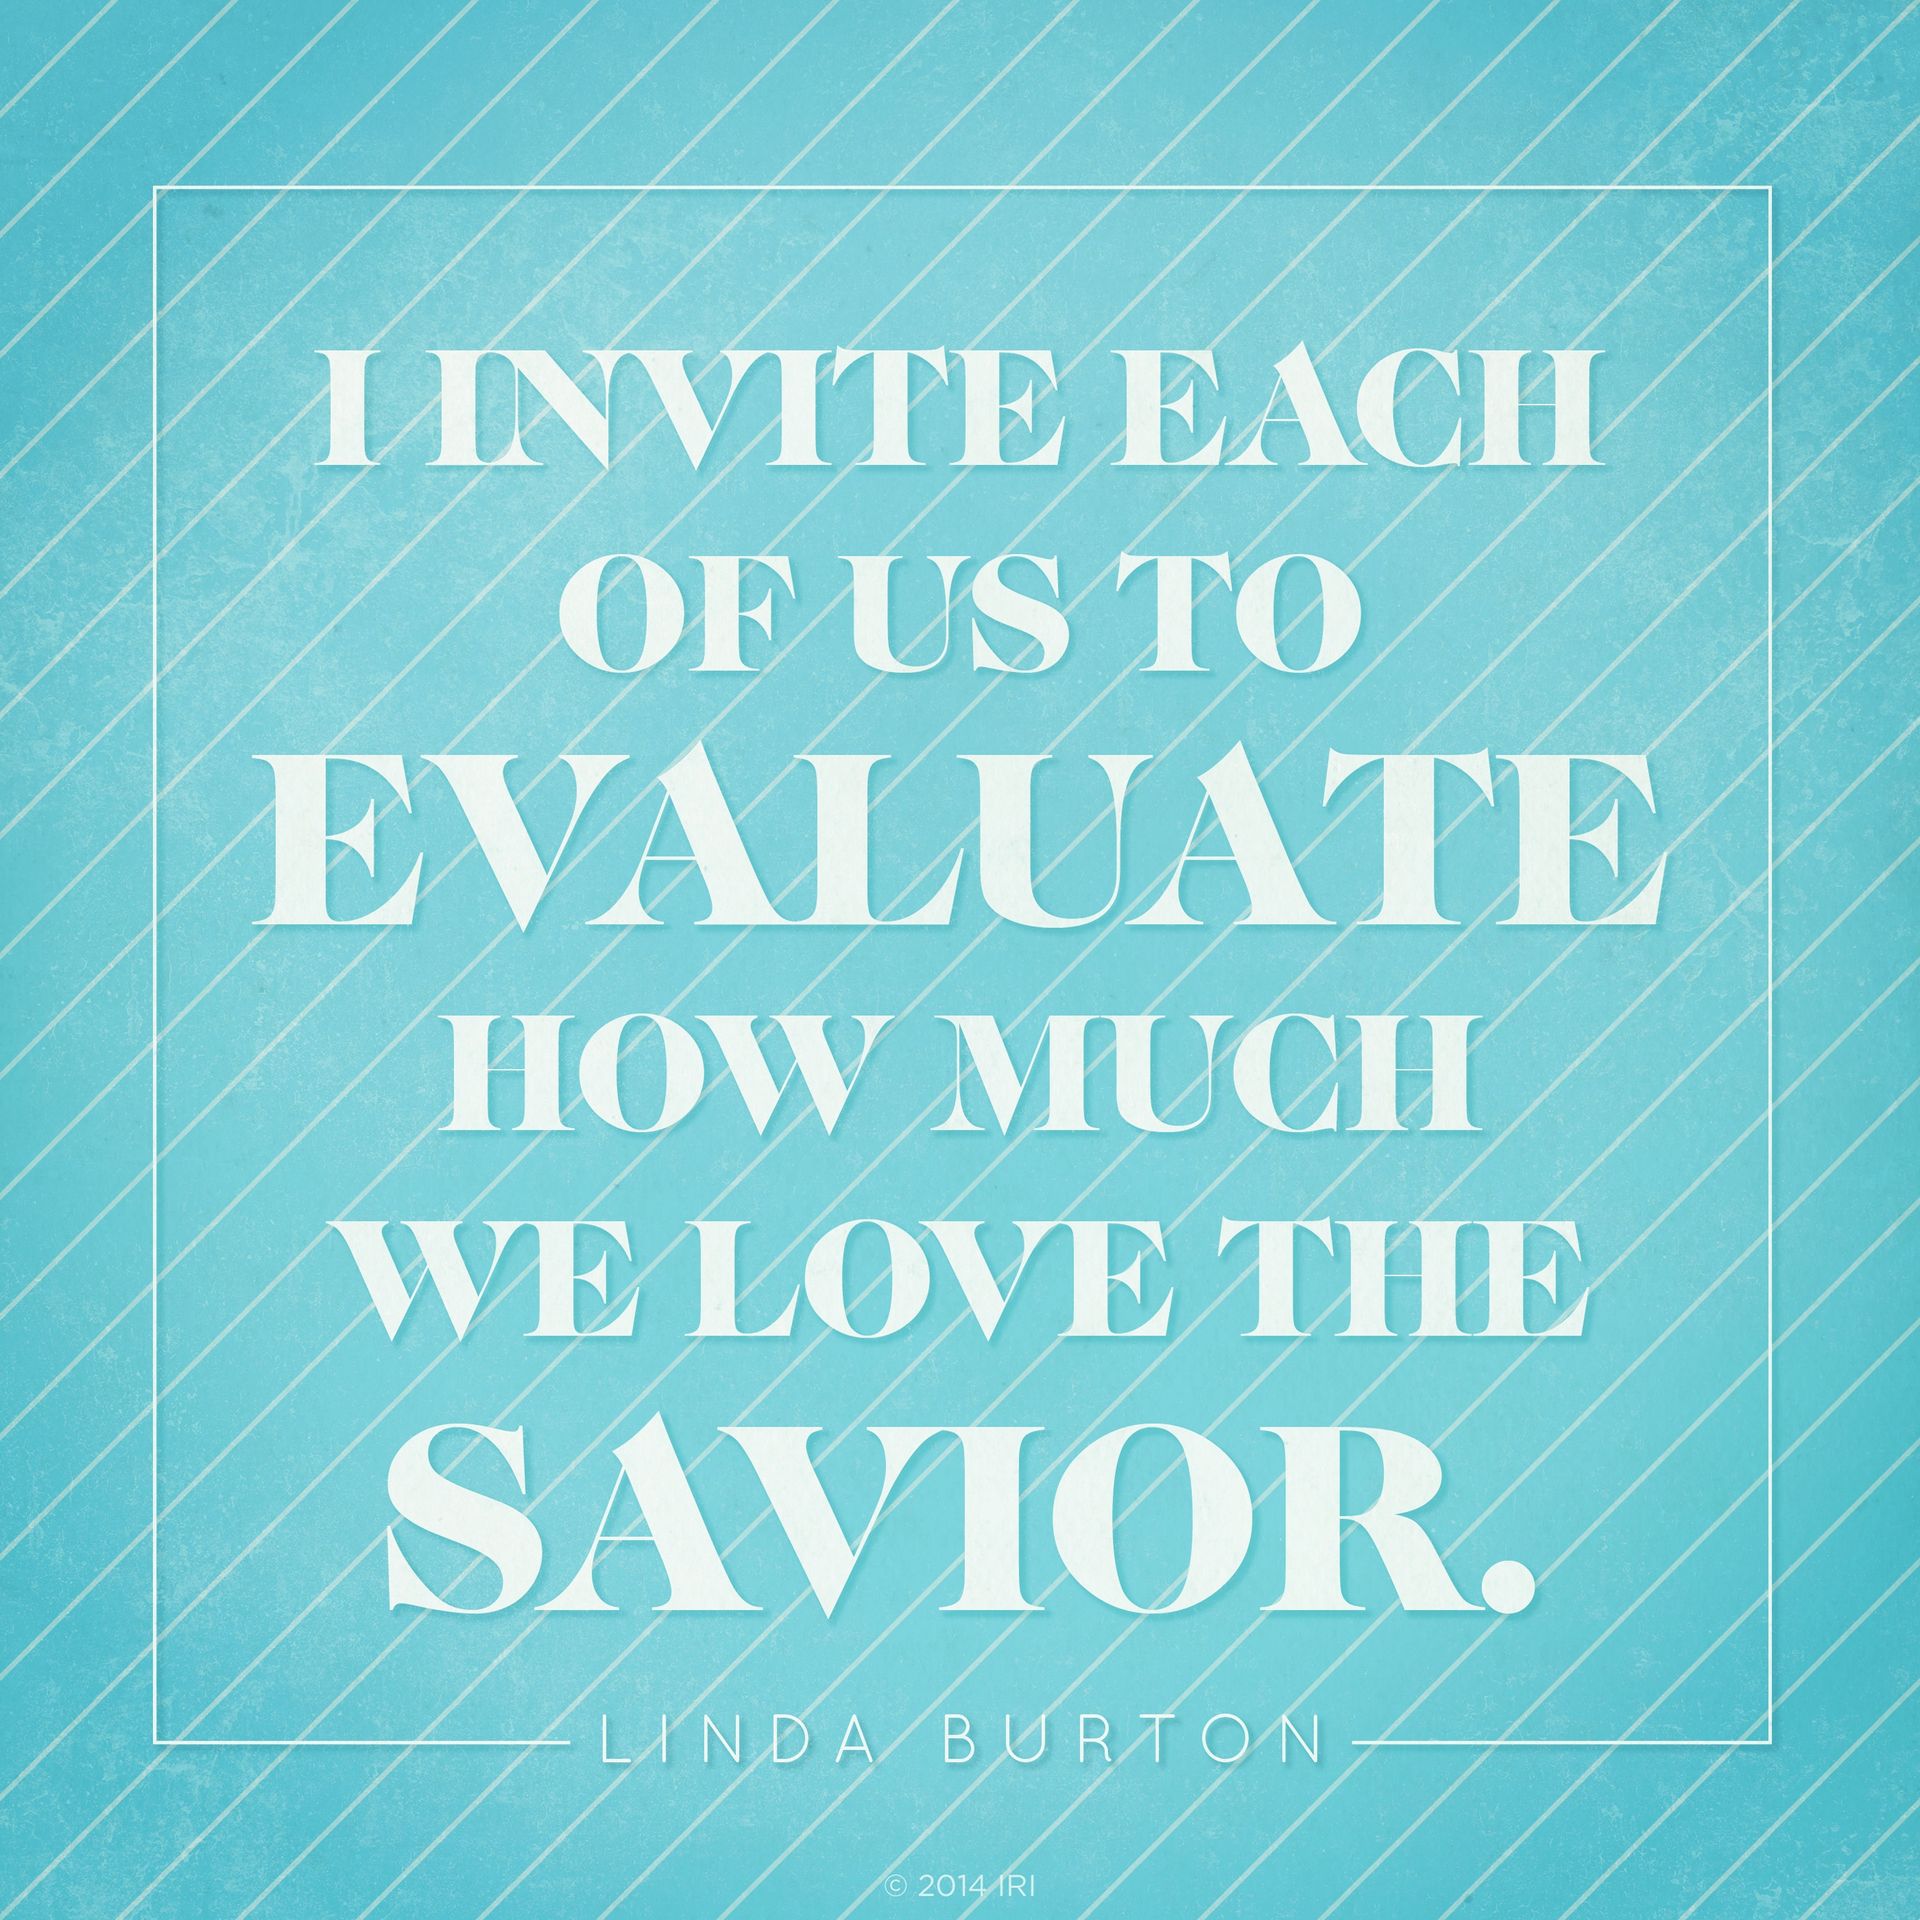 “I invite each of us to evaluate how much we love the Savior.”—Sister Linda K. Burton, “The Power, Joy, and Love of Covenant Keeping”